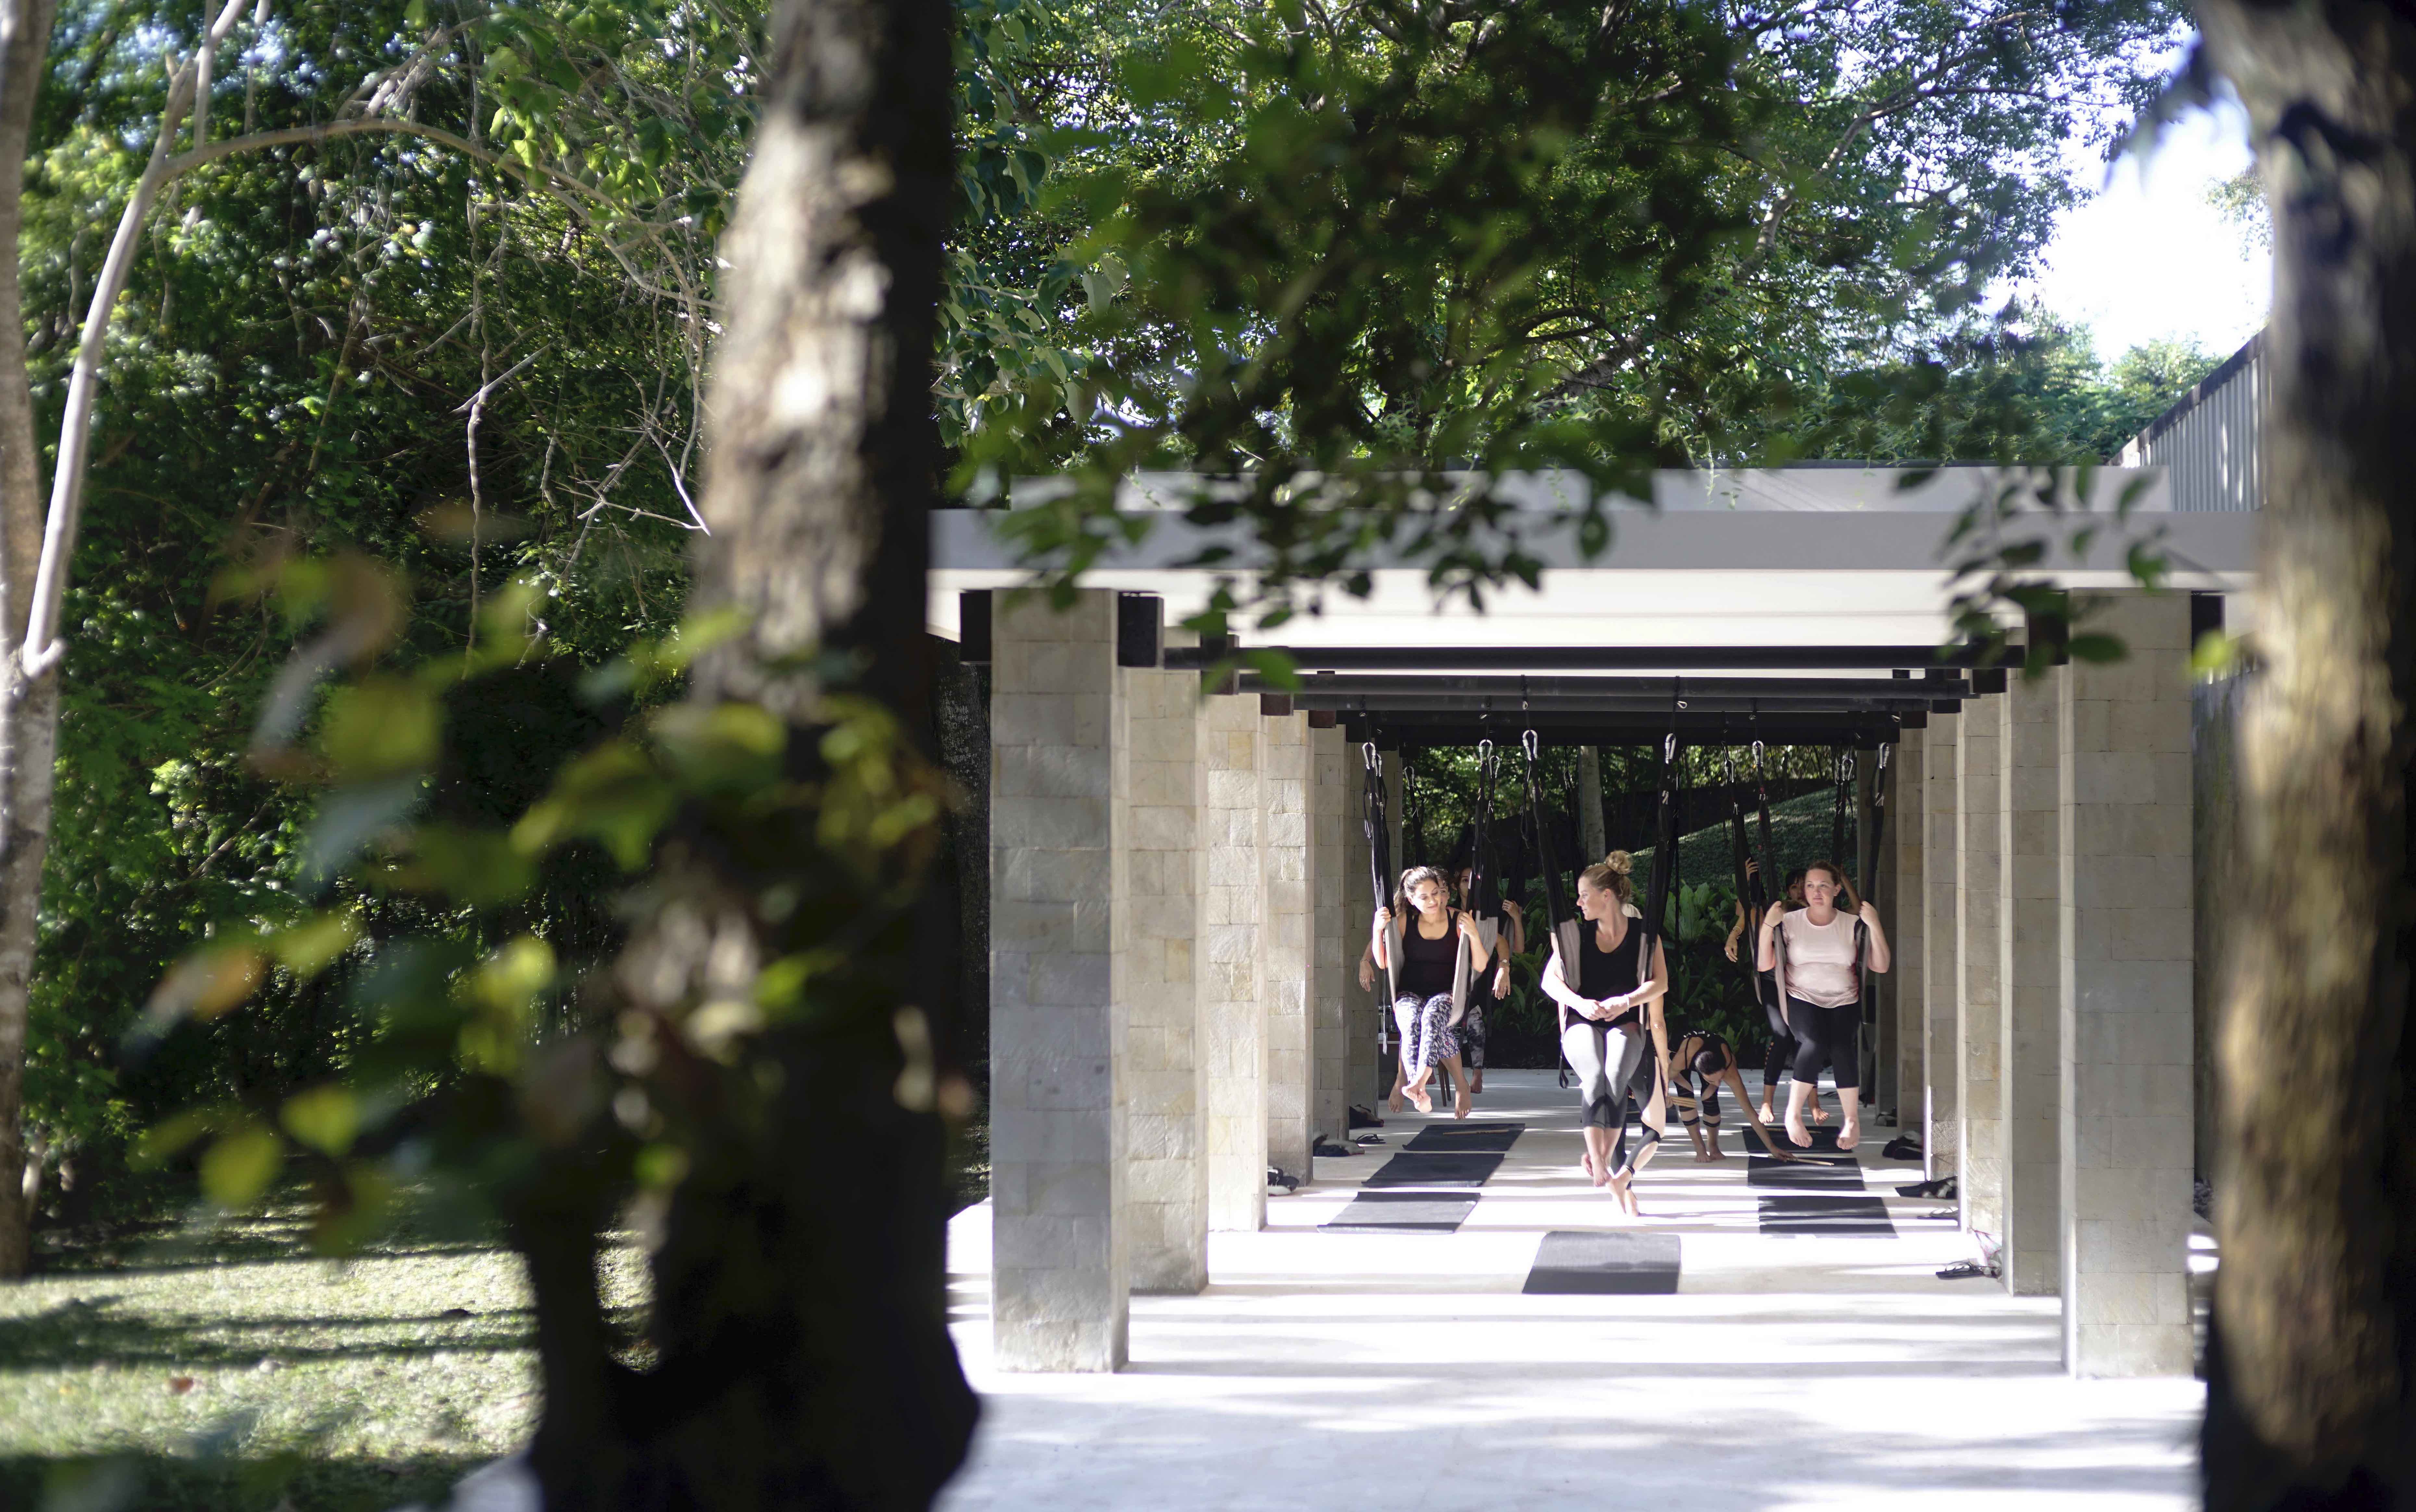 A Taste of The Good-for-you Life at Revivo Wellness Resort in Bali